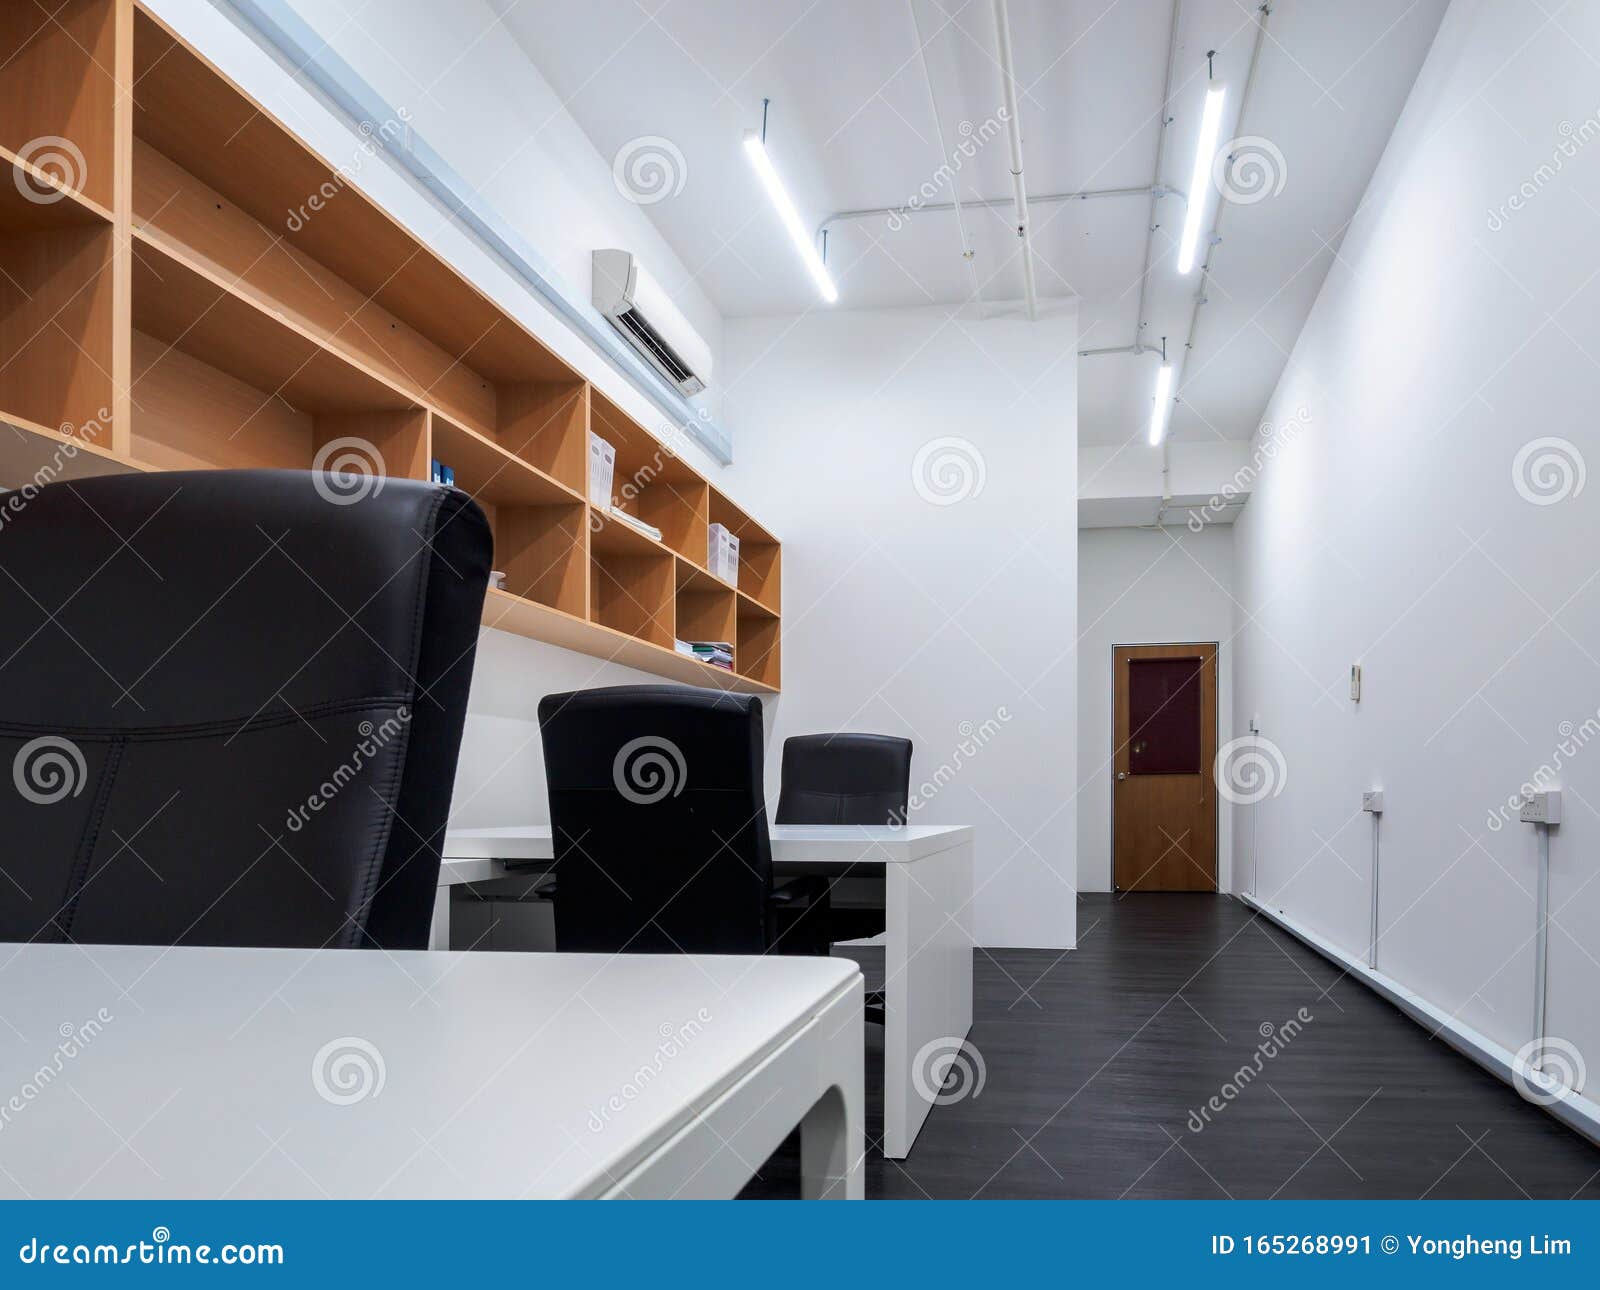 Simple Small Office Interior With Black And White Layout Stock Image Image Of White Architecture 165268991,Church Sanctuary Modern Small Church Stage Design